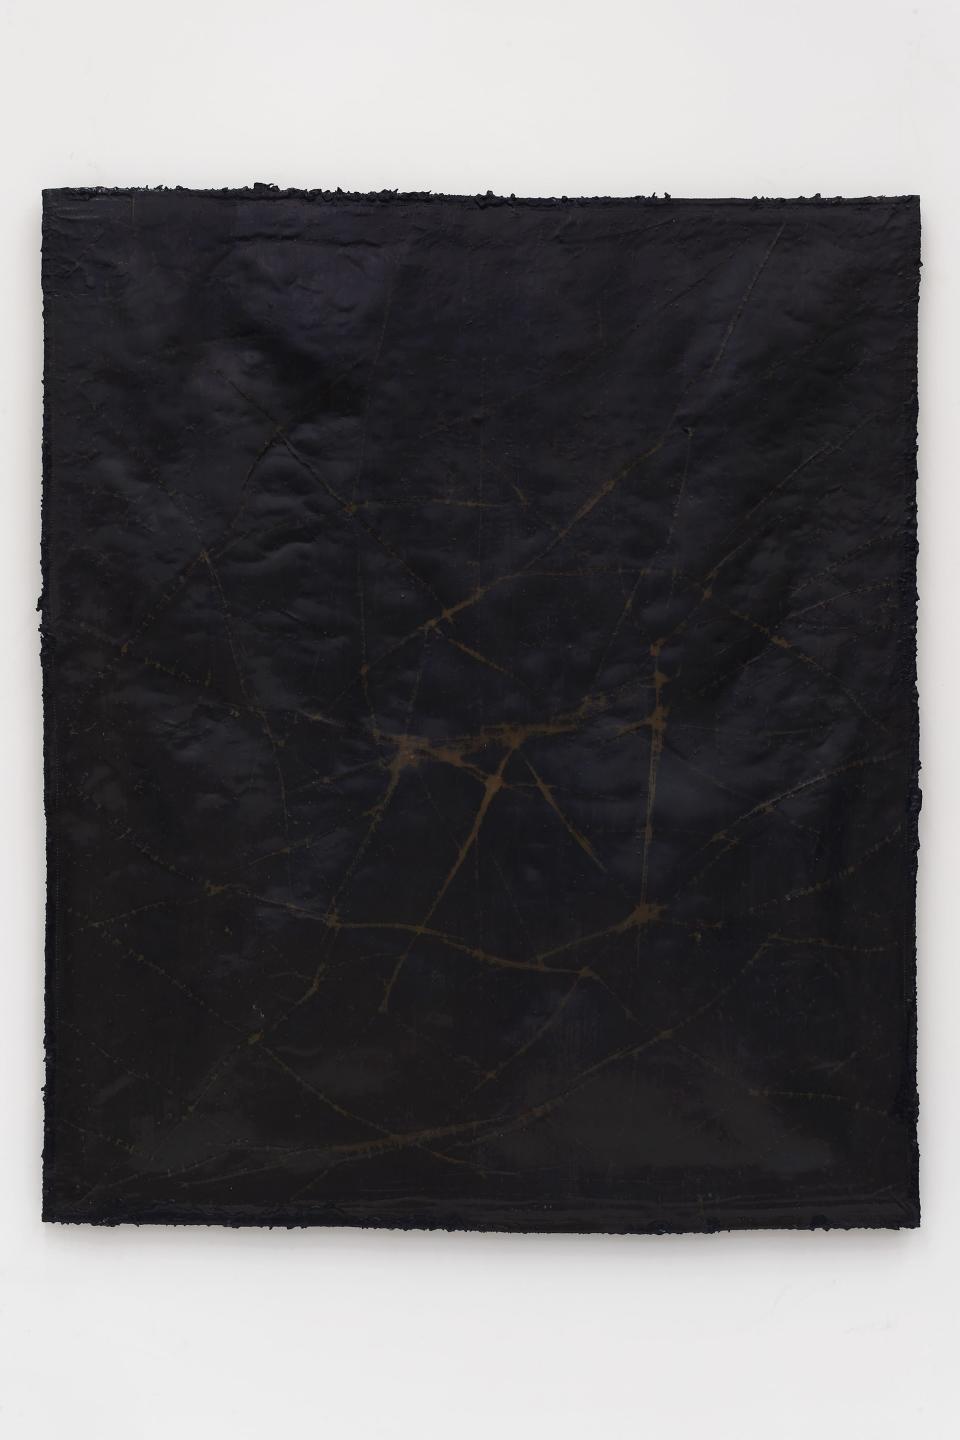 network #5, 2019
Cotton, wax, resin, and tar on canvas
62 1/2 x 53 x 1 1/2 inches